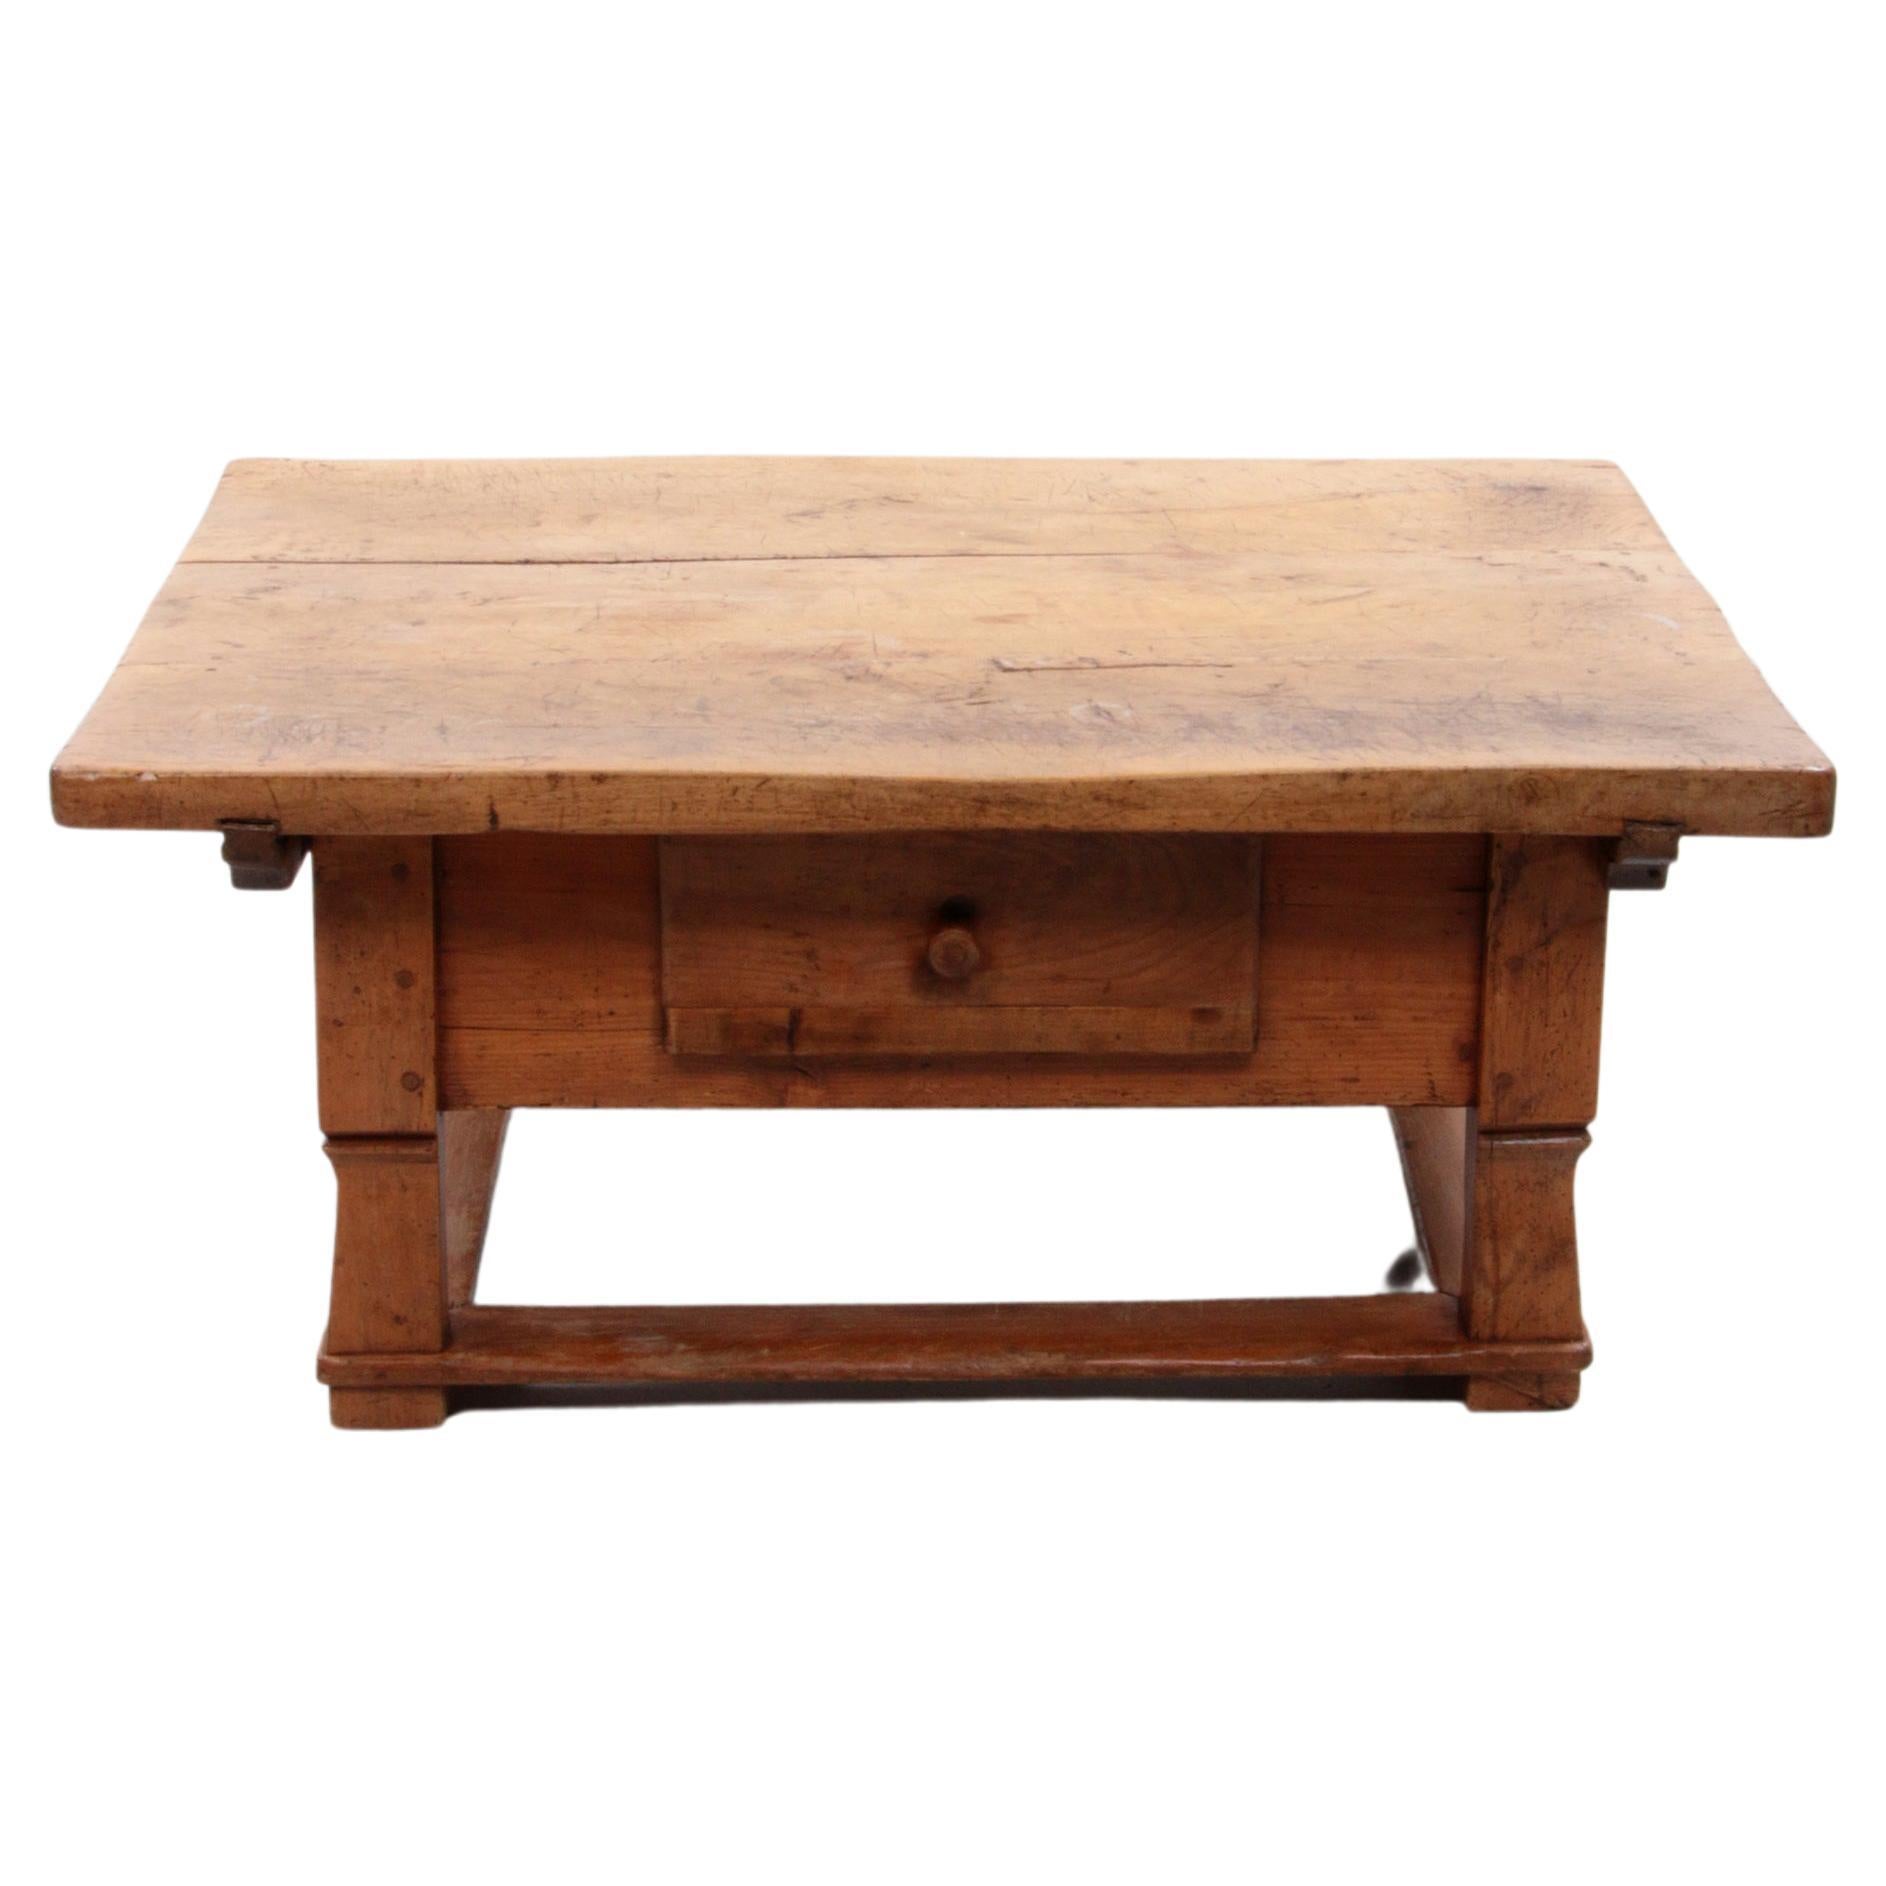 Austrian Coffee Table18- 19th Century Walnut Payment Table with Drawer, Austria For Sale